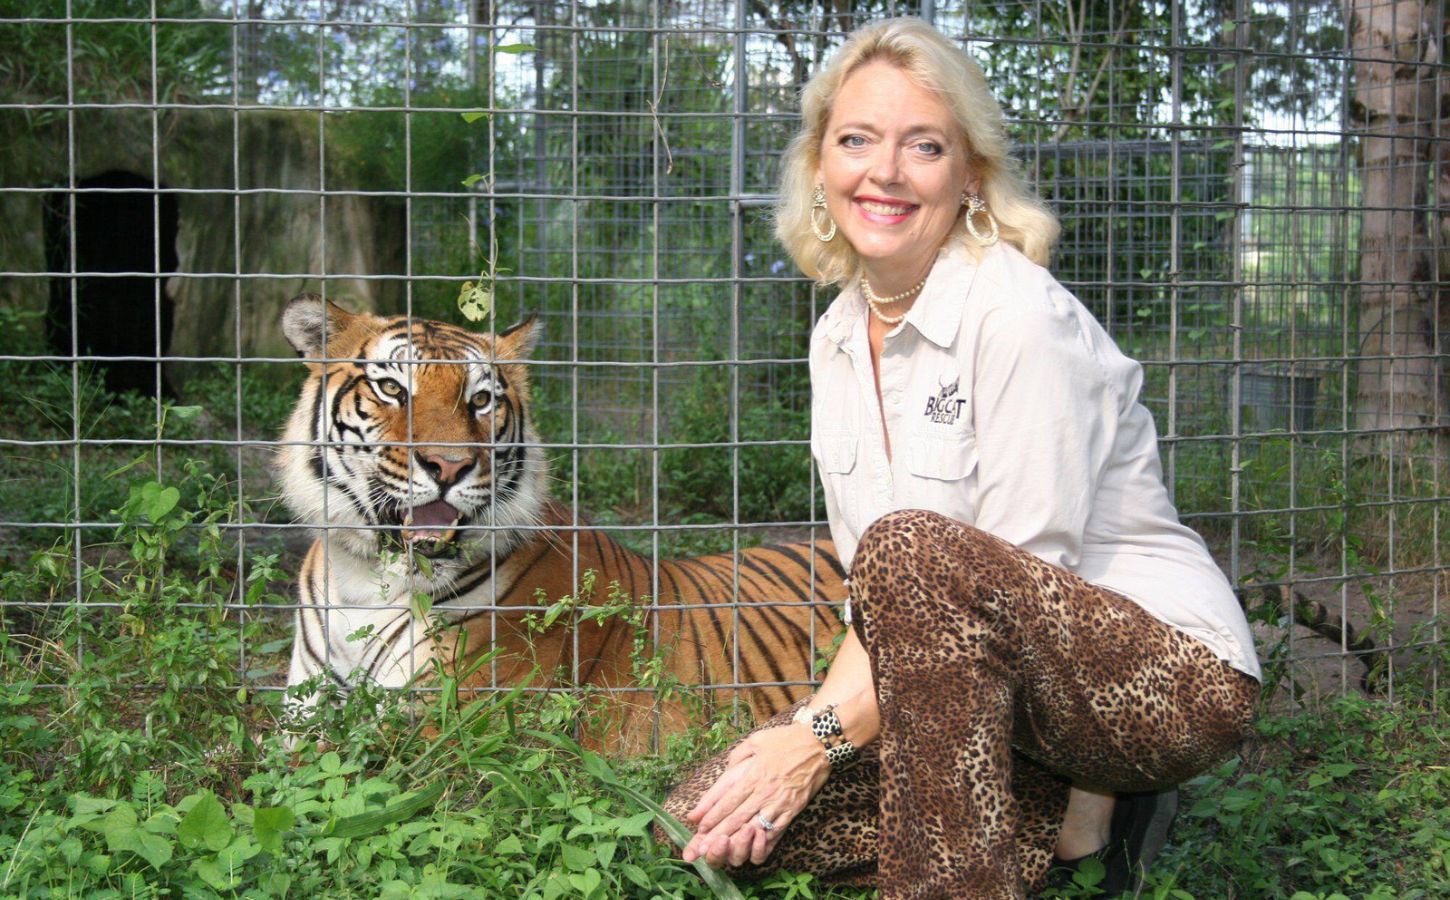 Carole Baskin in the 1990s crouched beside a tiger she has rescued